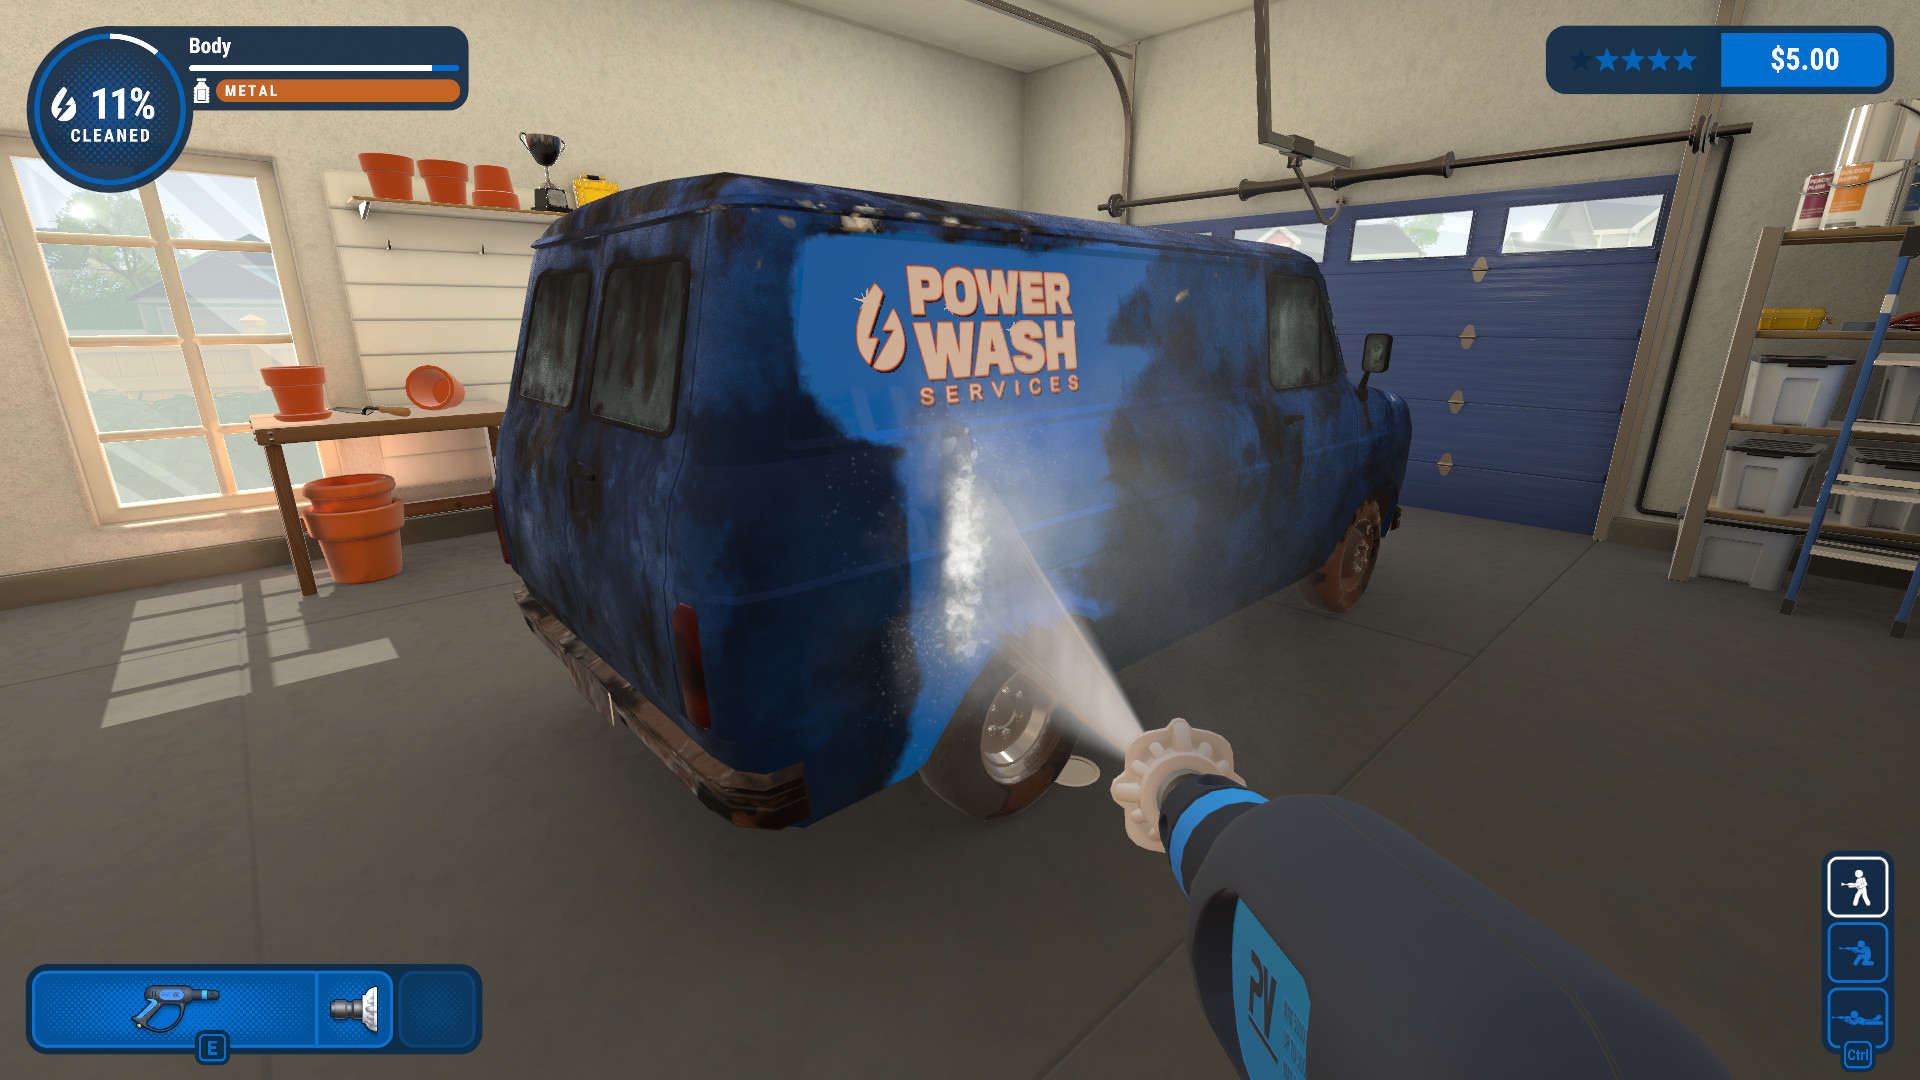 PowerWash Simulator lets me obliterate dirt into nothing and now I